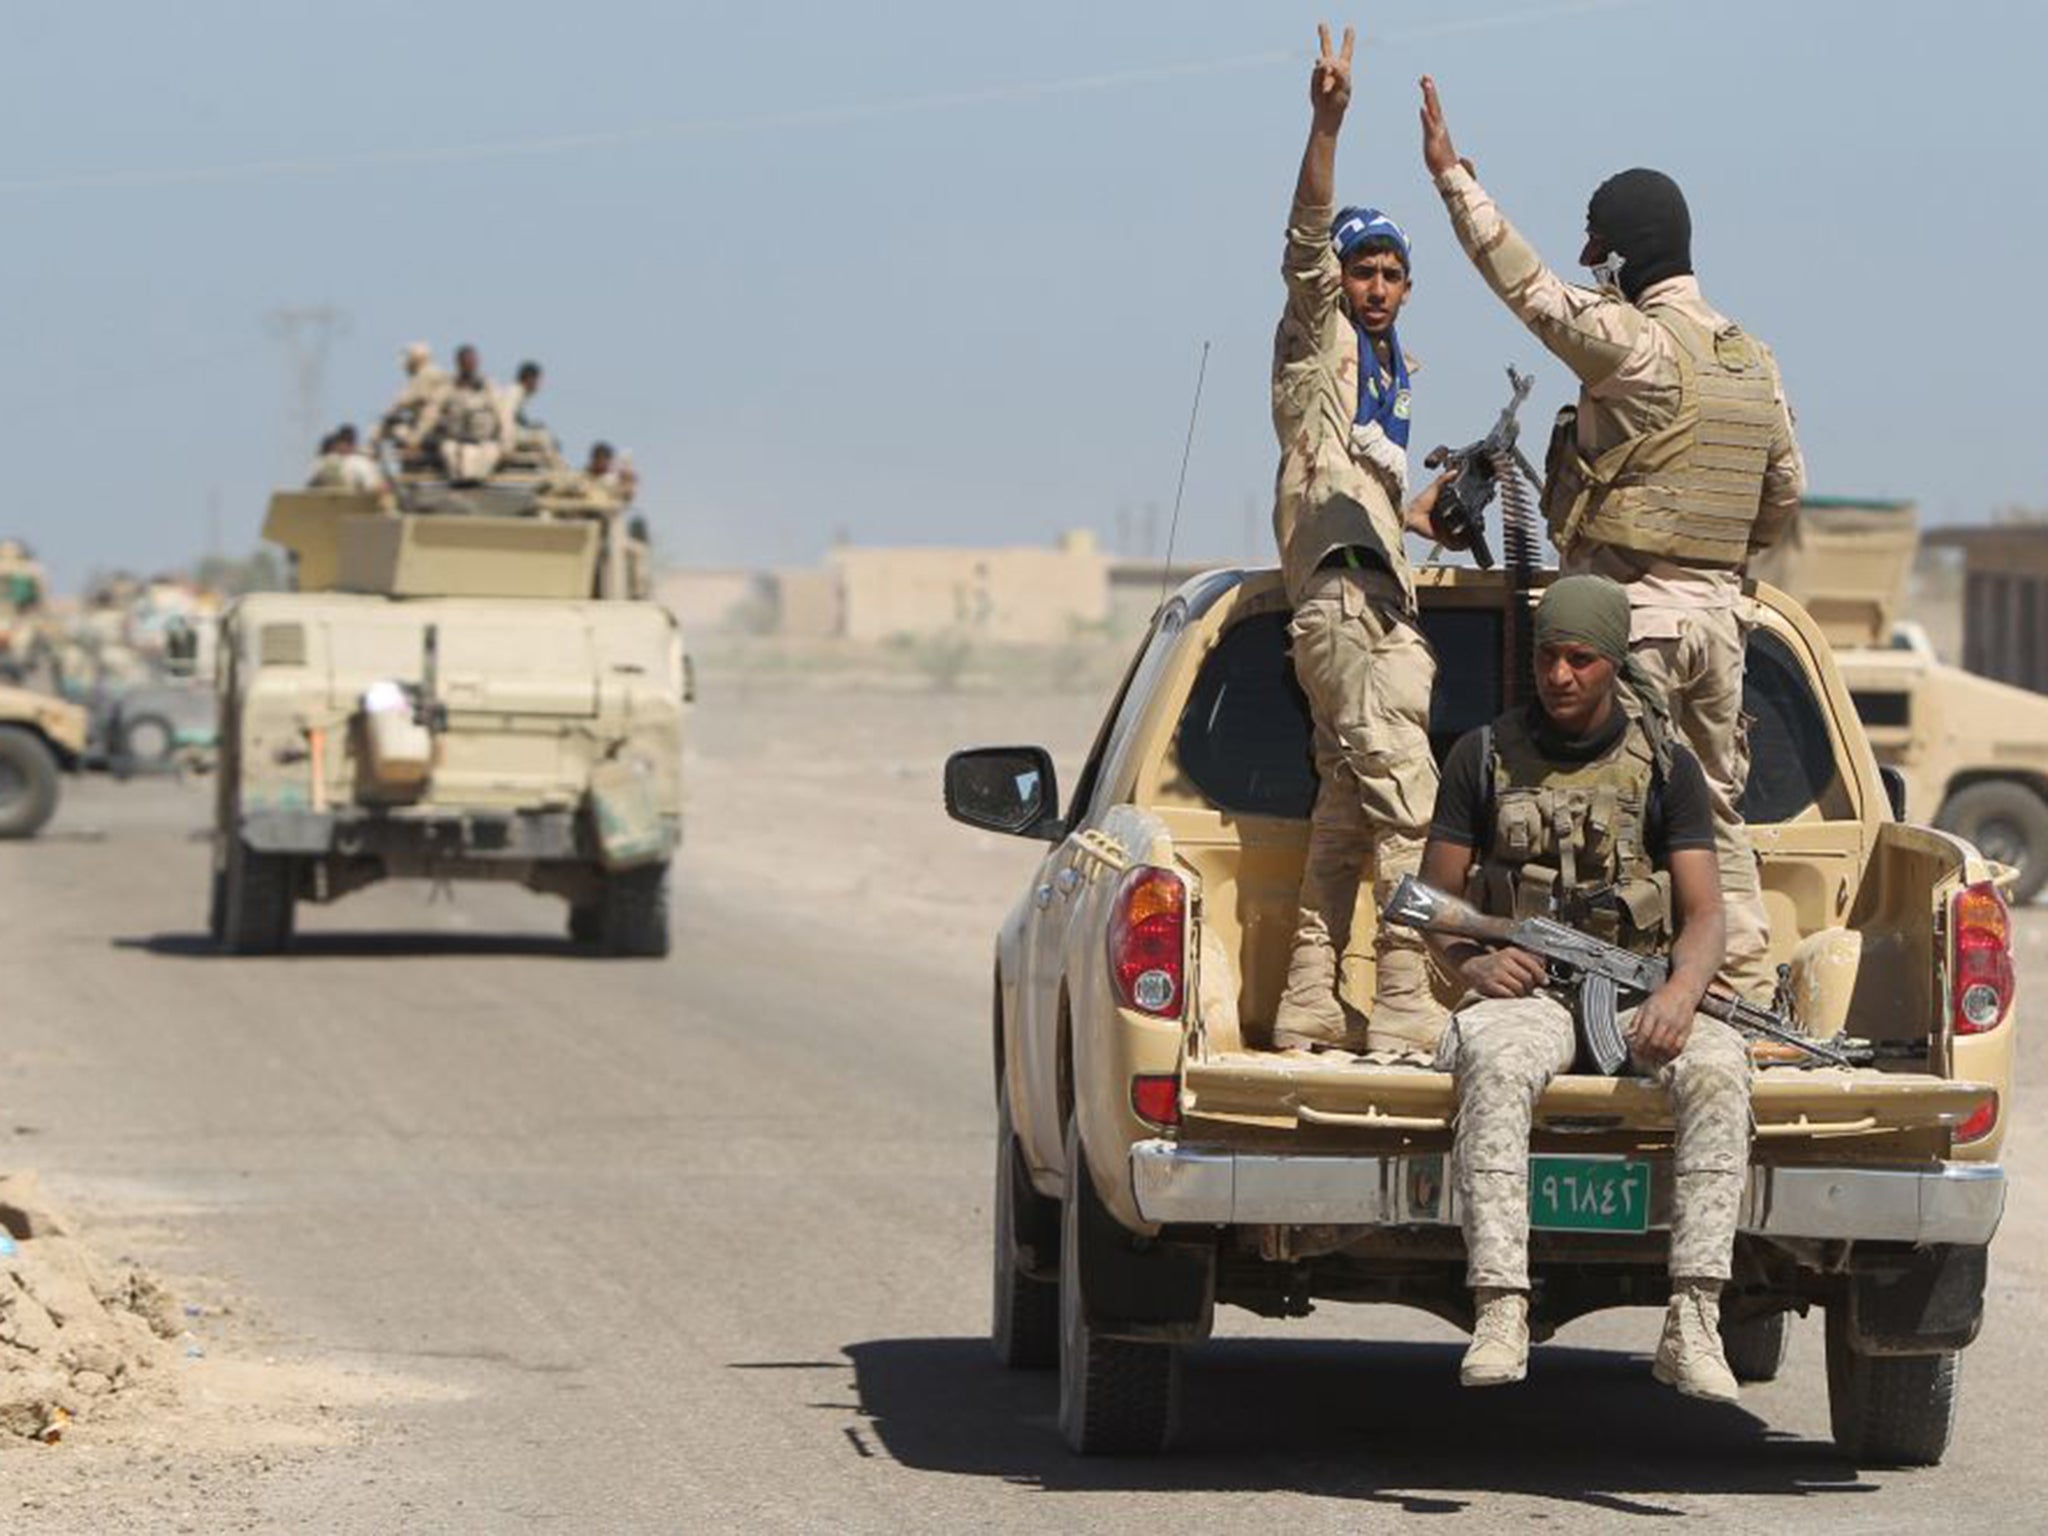 Iraqi security forces are moving towards retaking Anbar province, but analysts say a full reconquest remains out of reach